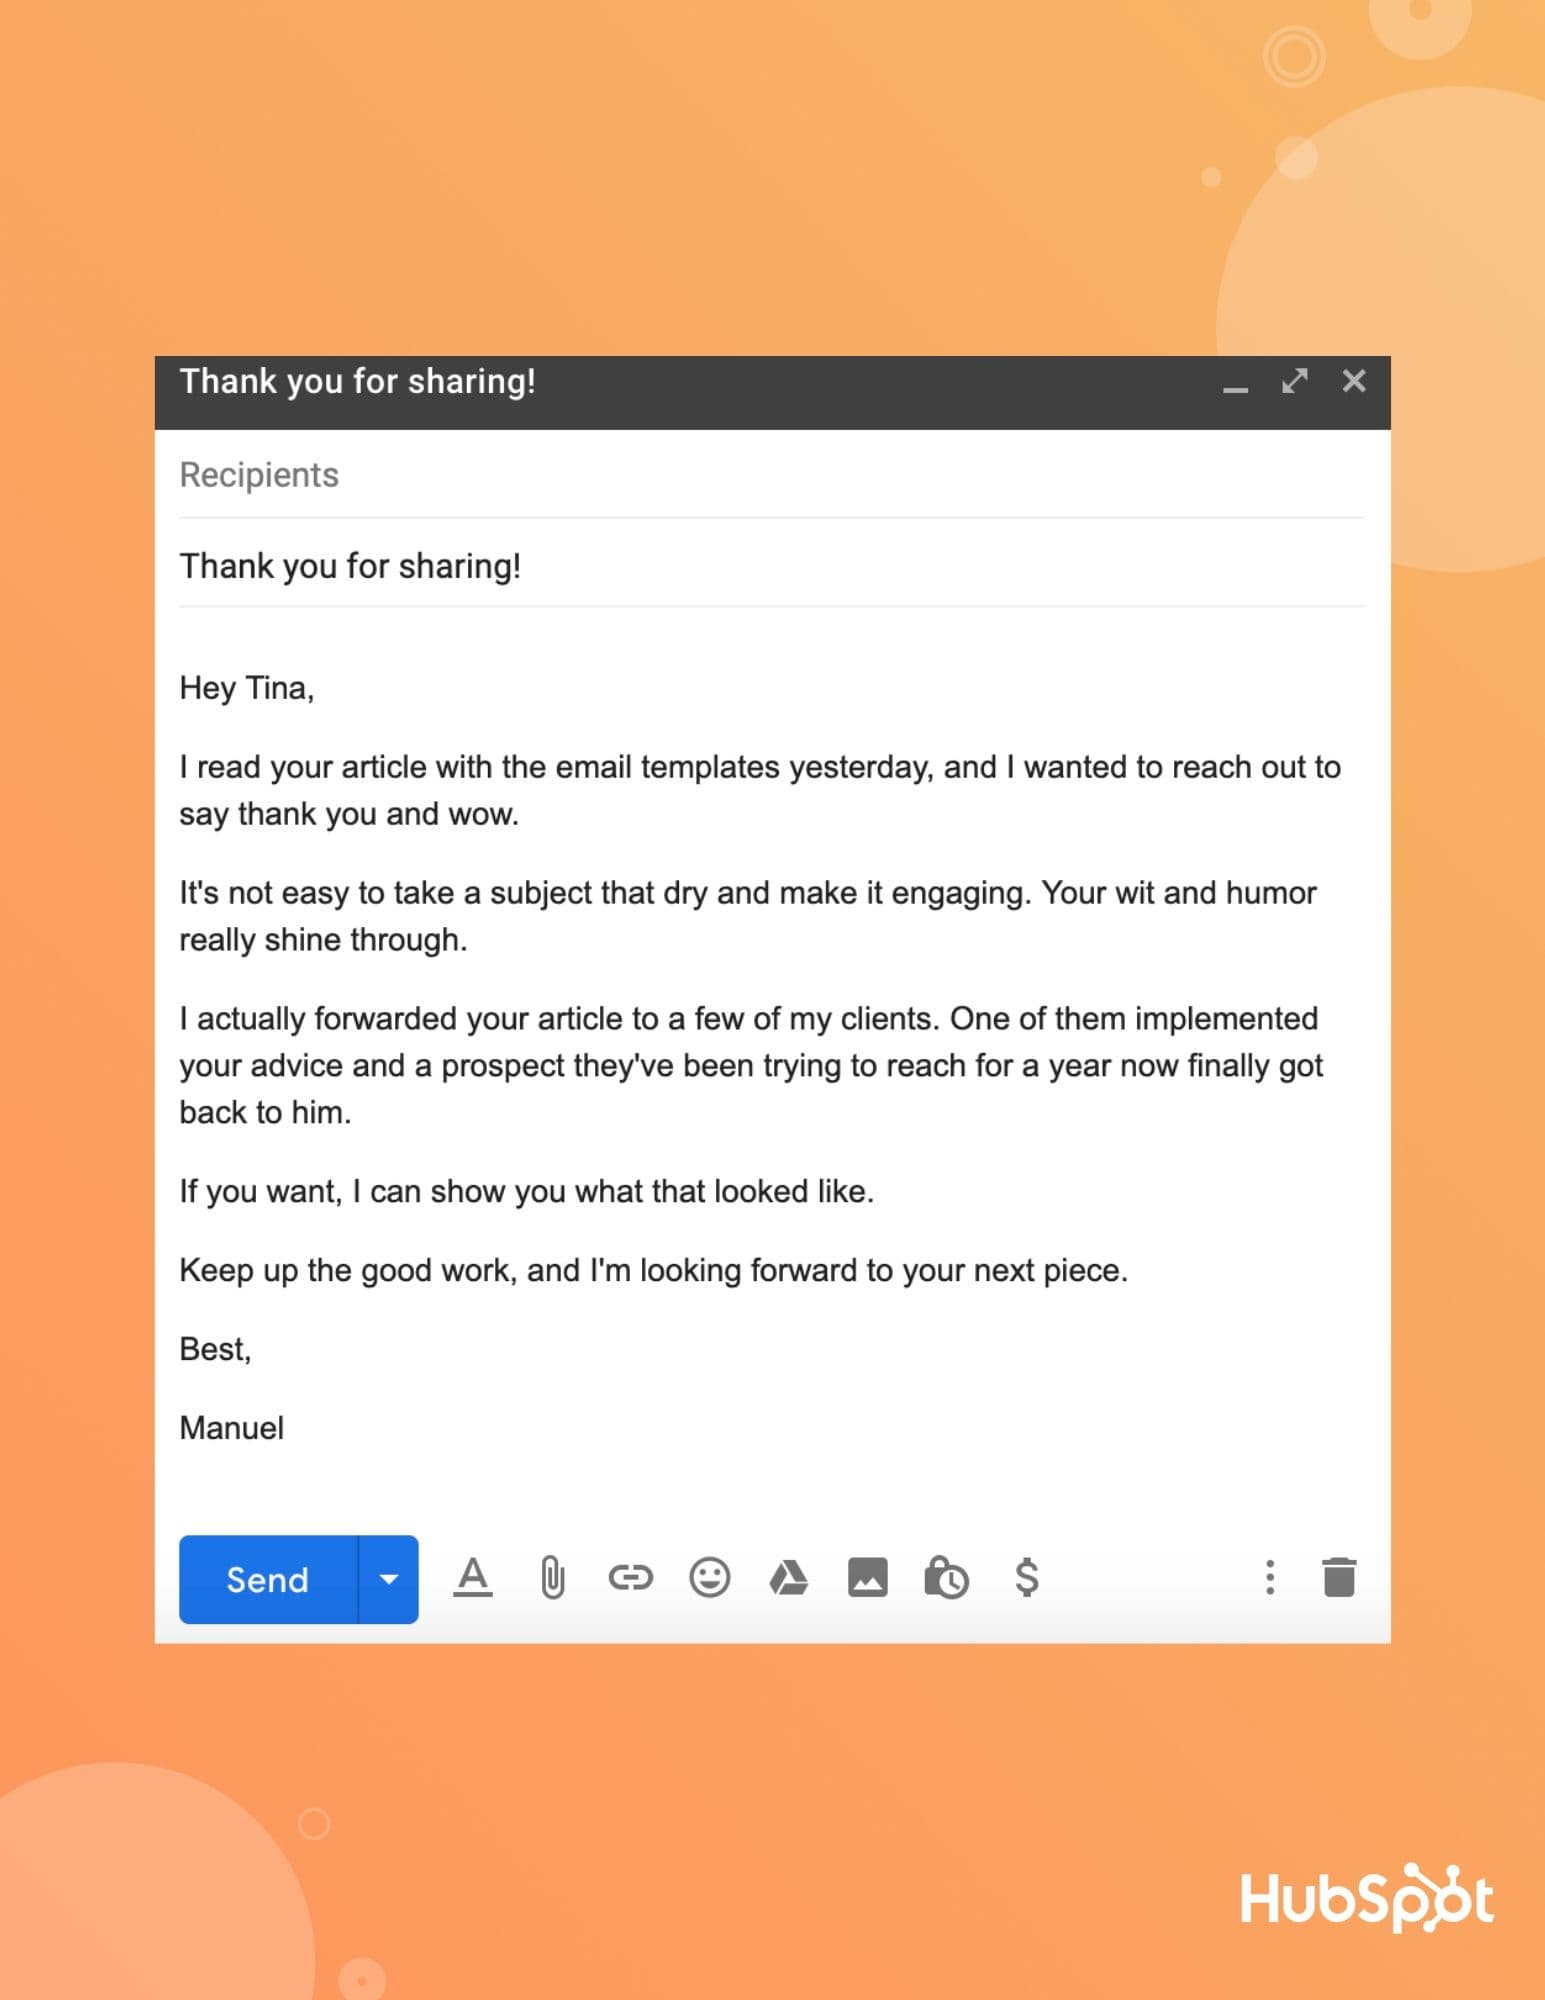 22 Sales Prospecting Email Templates Guaranteed to Start a